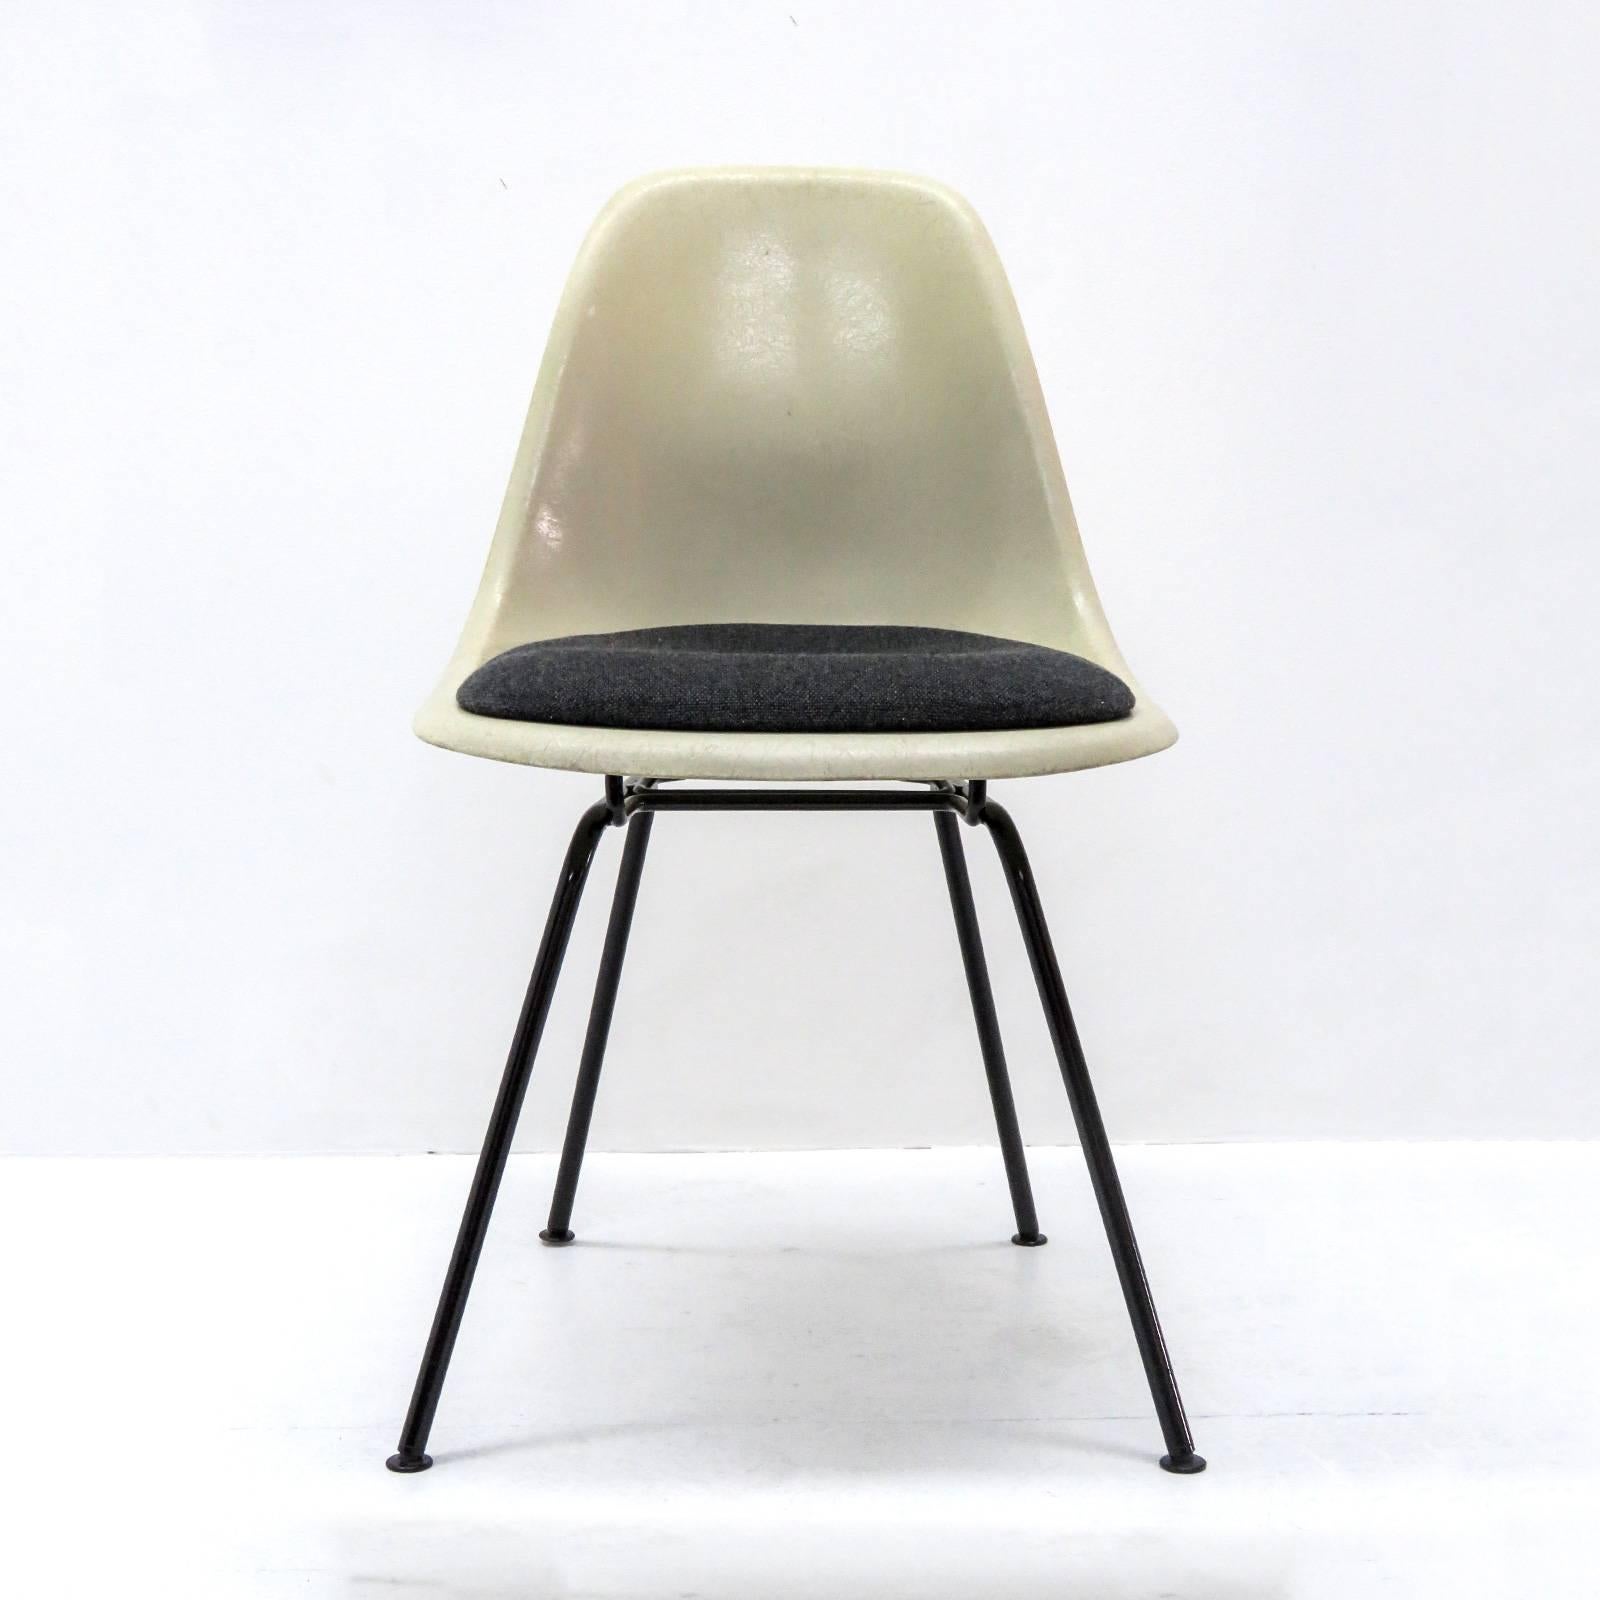 elegant iconic DSX chairs by Charles & Ray Eames for Herman Miller, with parchment colored fiberglass shells in very good to excellent condition, black enameled bases, original shocks and newly upholstered seat cushions in dark grey wool, shells